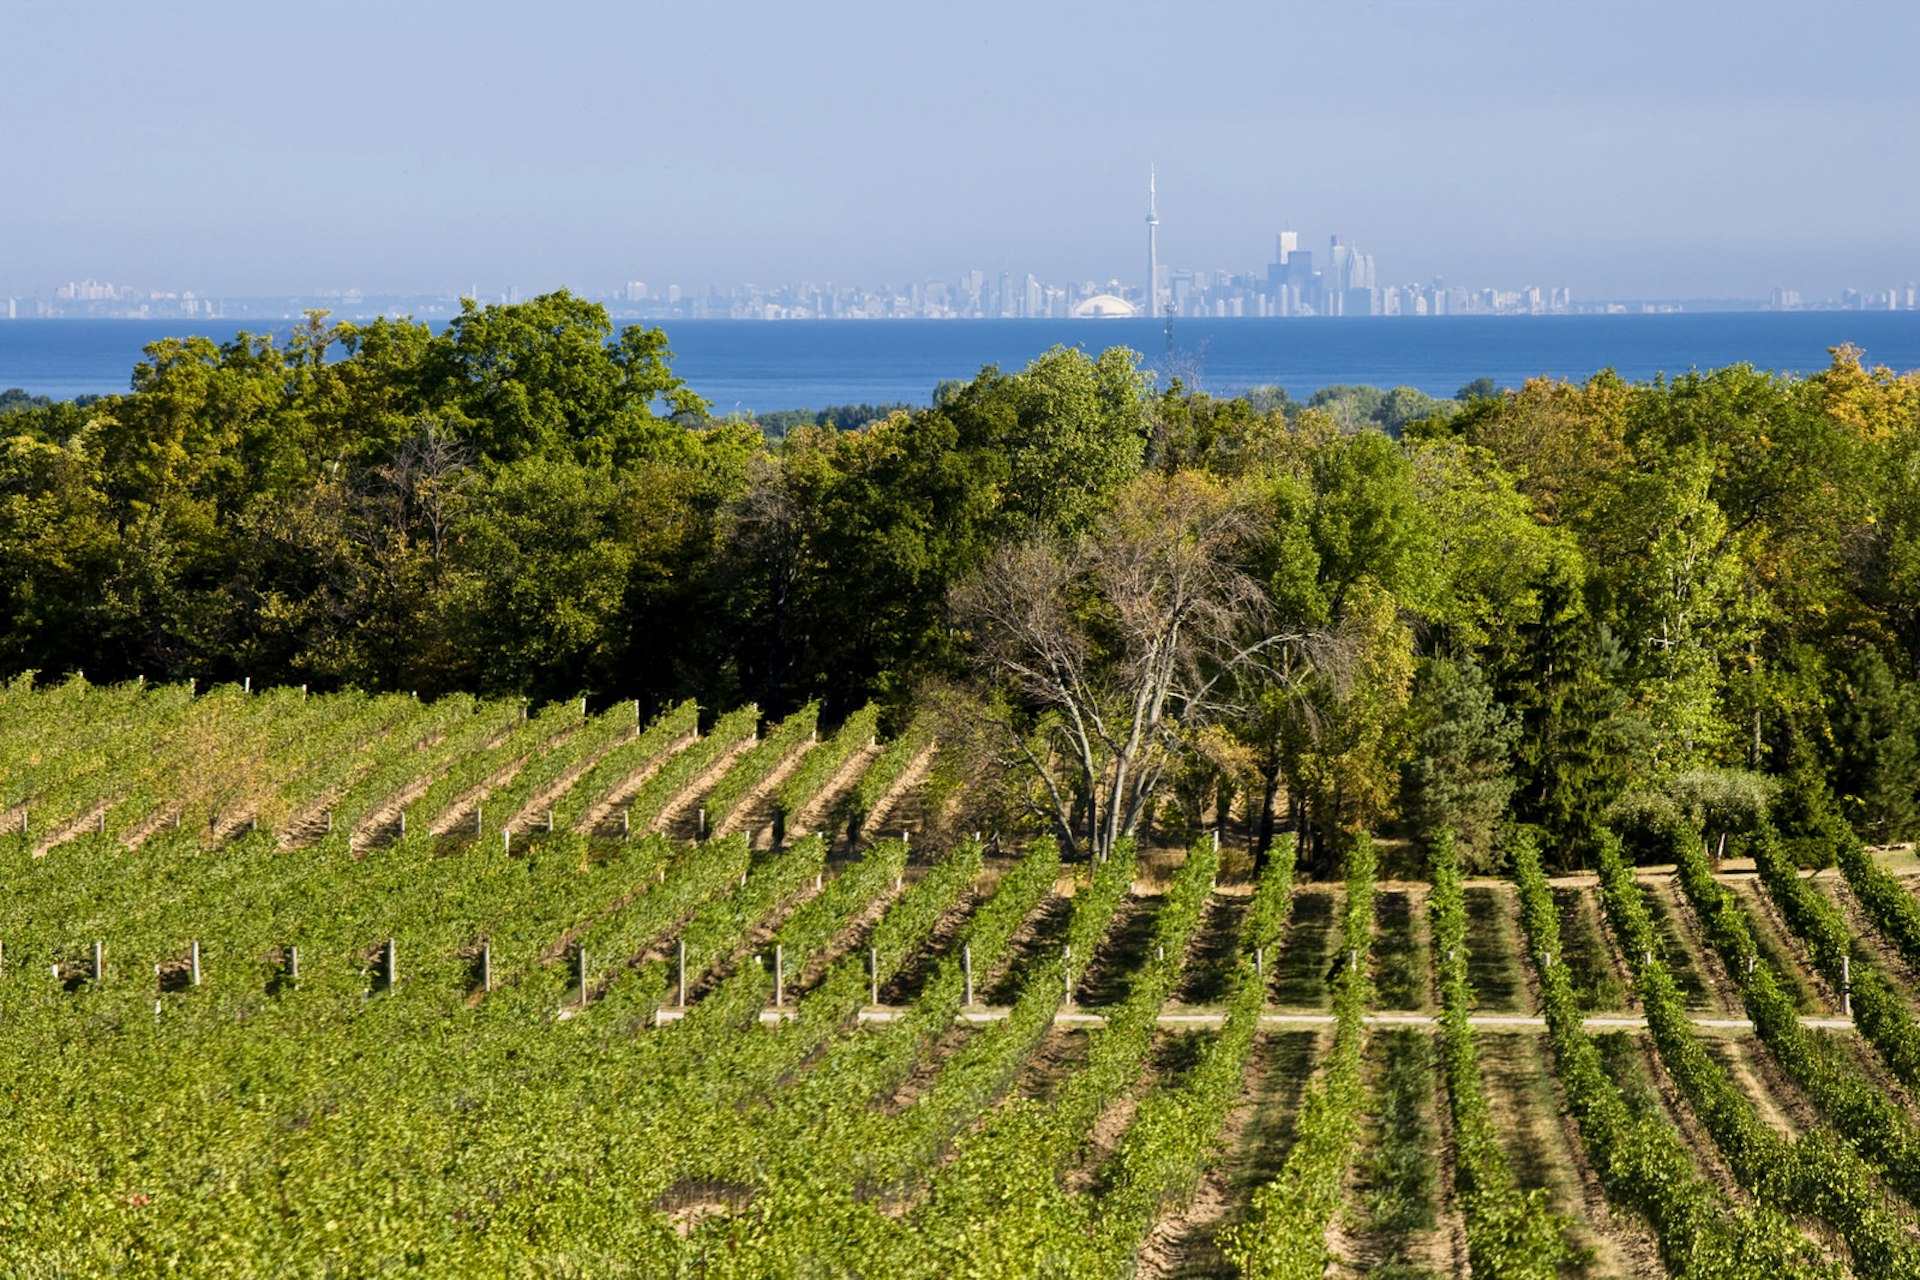 A vinyard with rows of grape vines is in the foreground, with a lake view behind. Far in the distance, on the other side of the lake, is the skyline of Toronto.